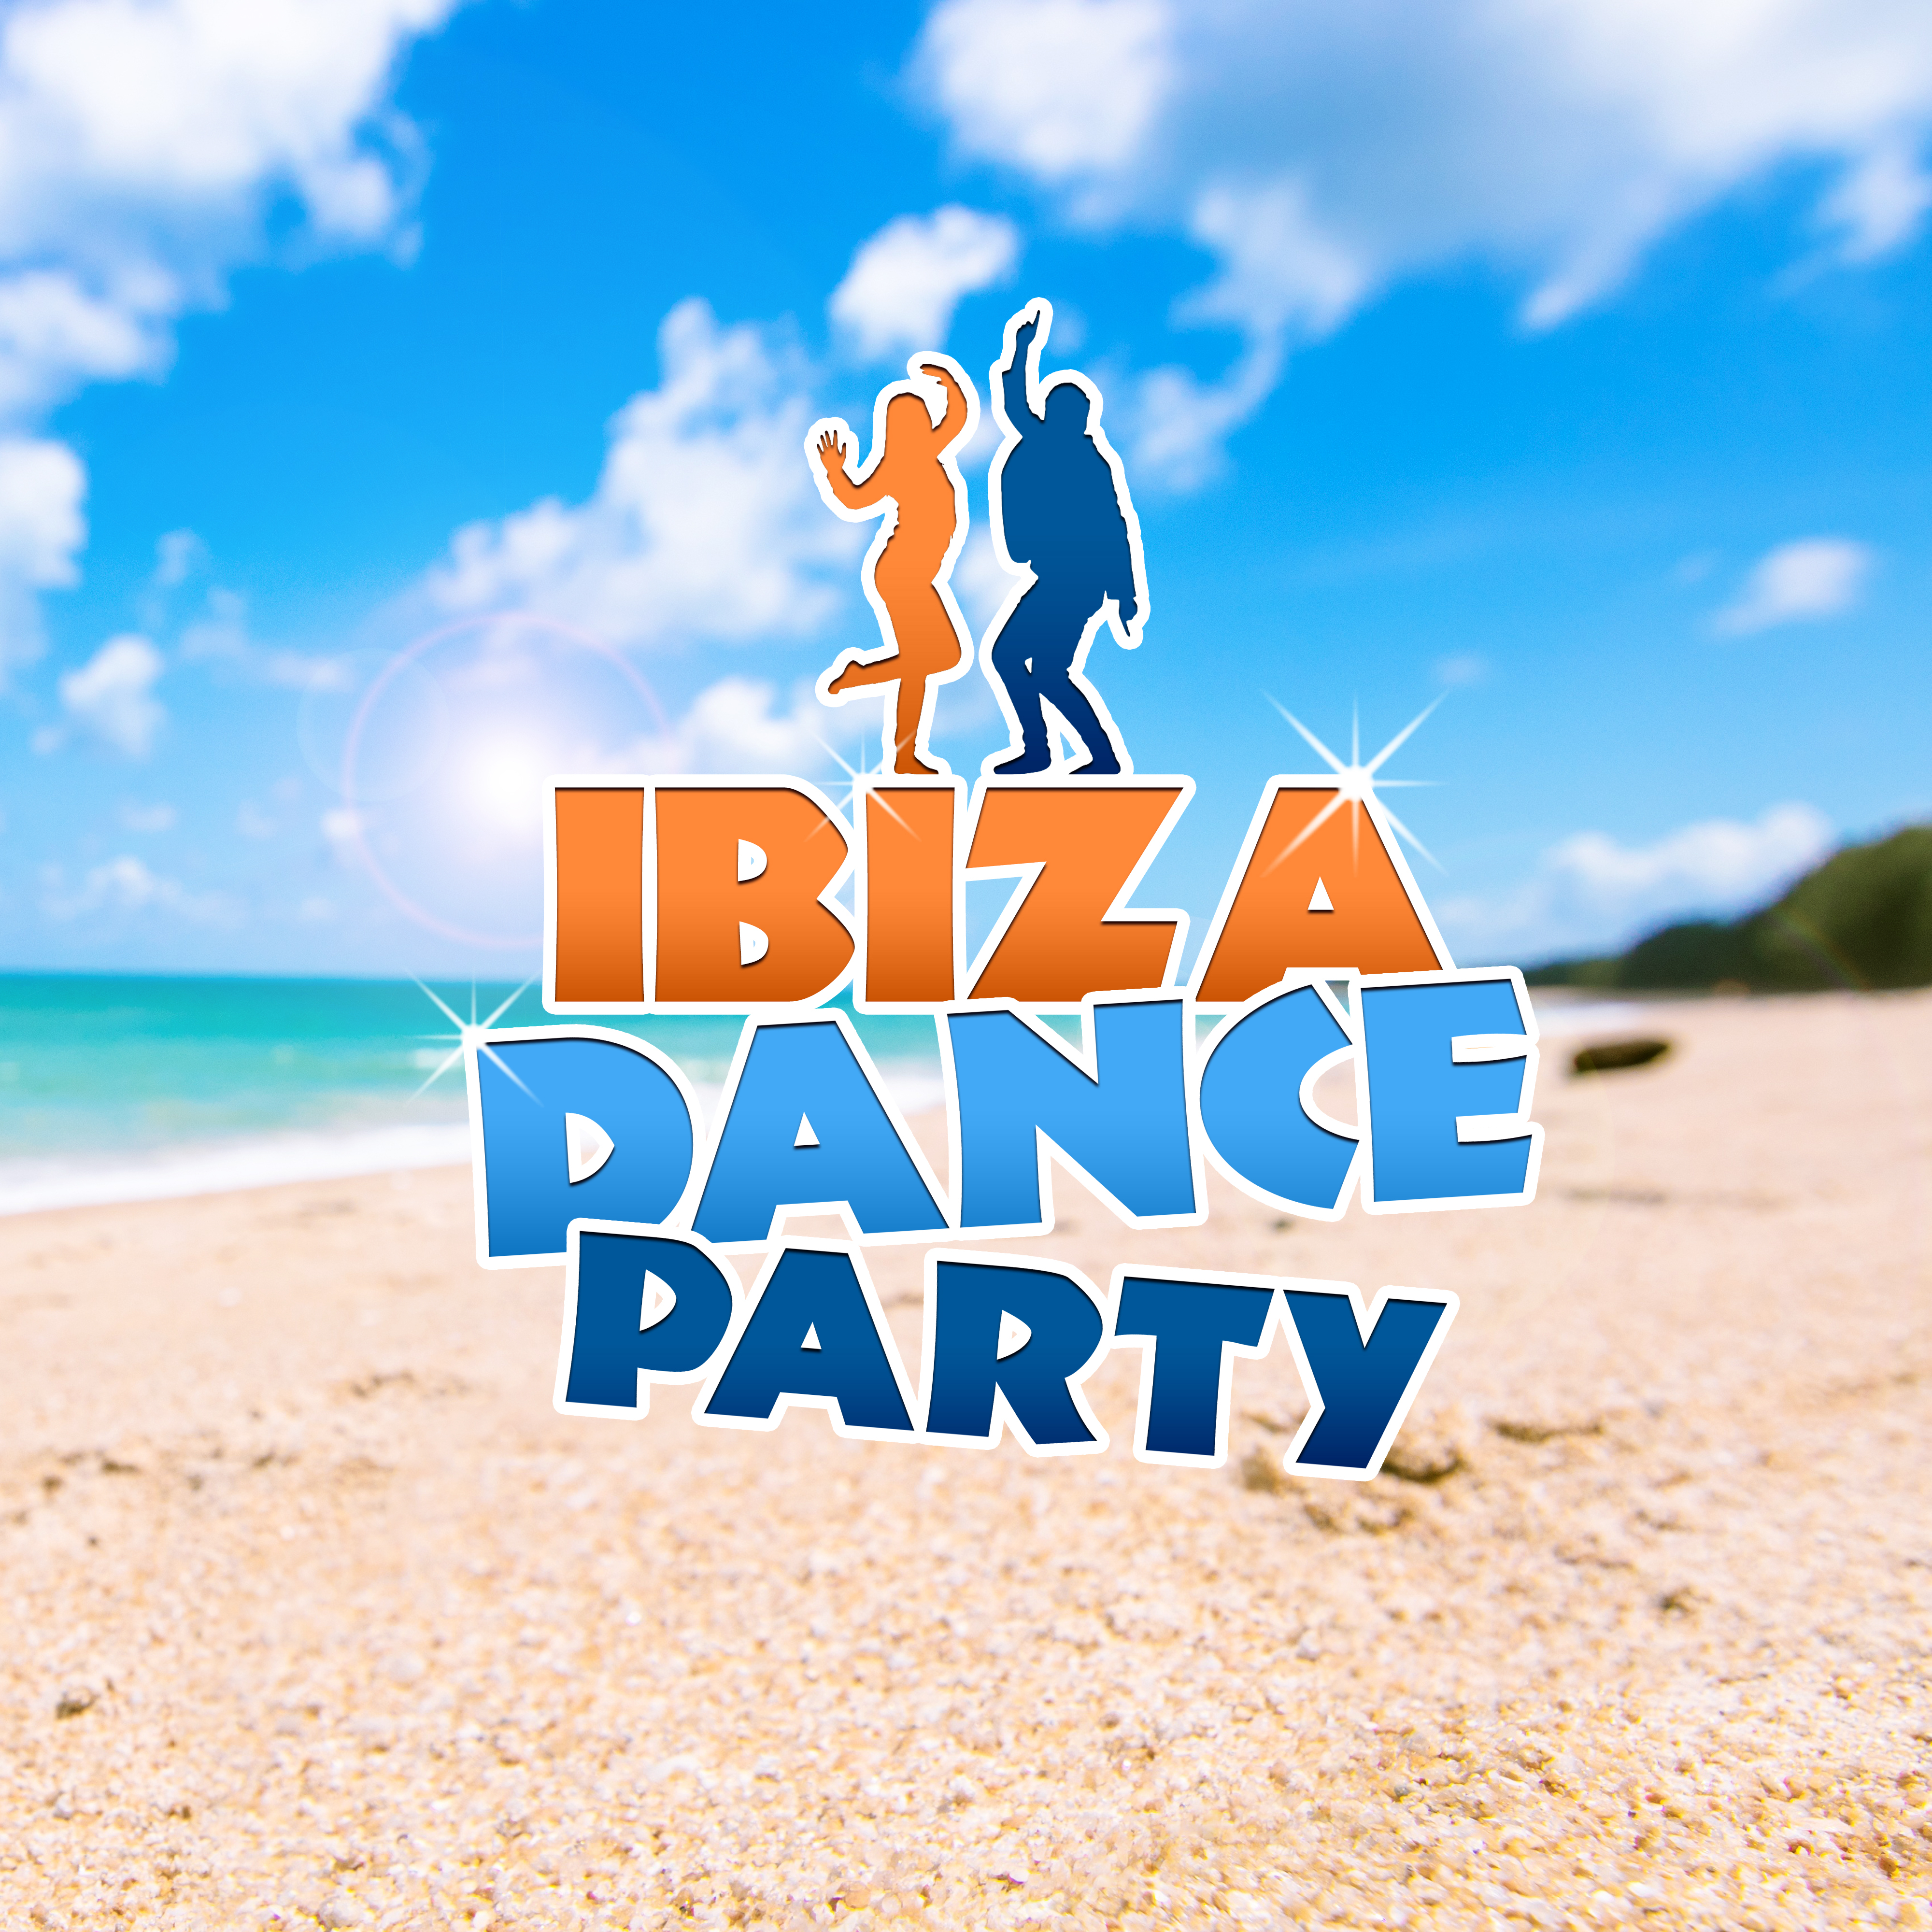 Ibiza Dance Party – Chill Out 2017, Summer Hits, Beach Disco, Party Night, Dancefloor, **** Vibes, Ibiza Chillout